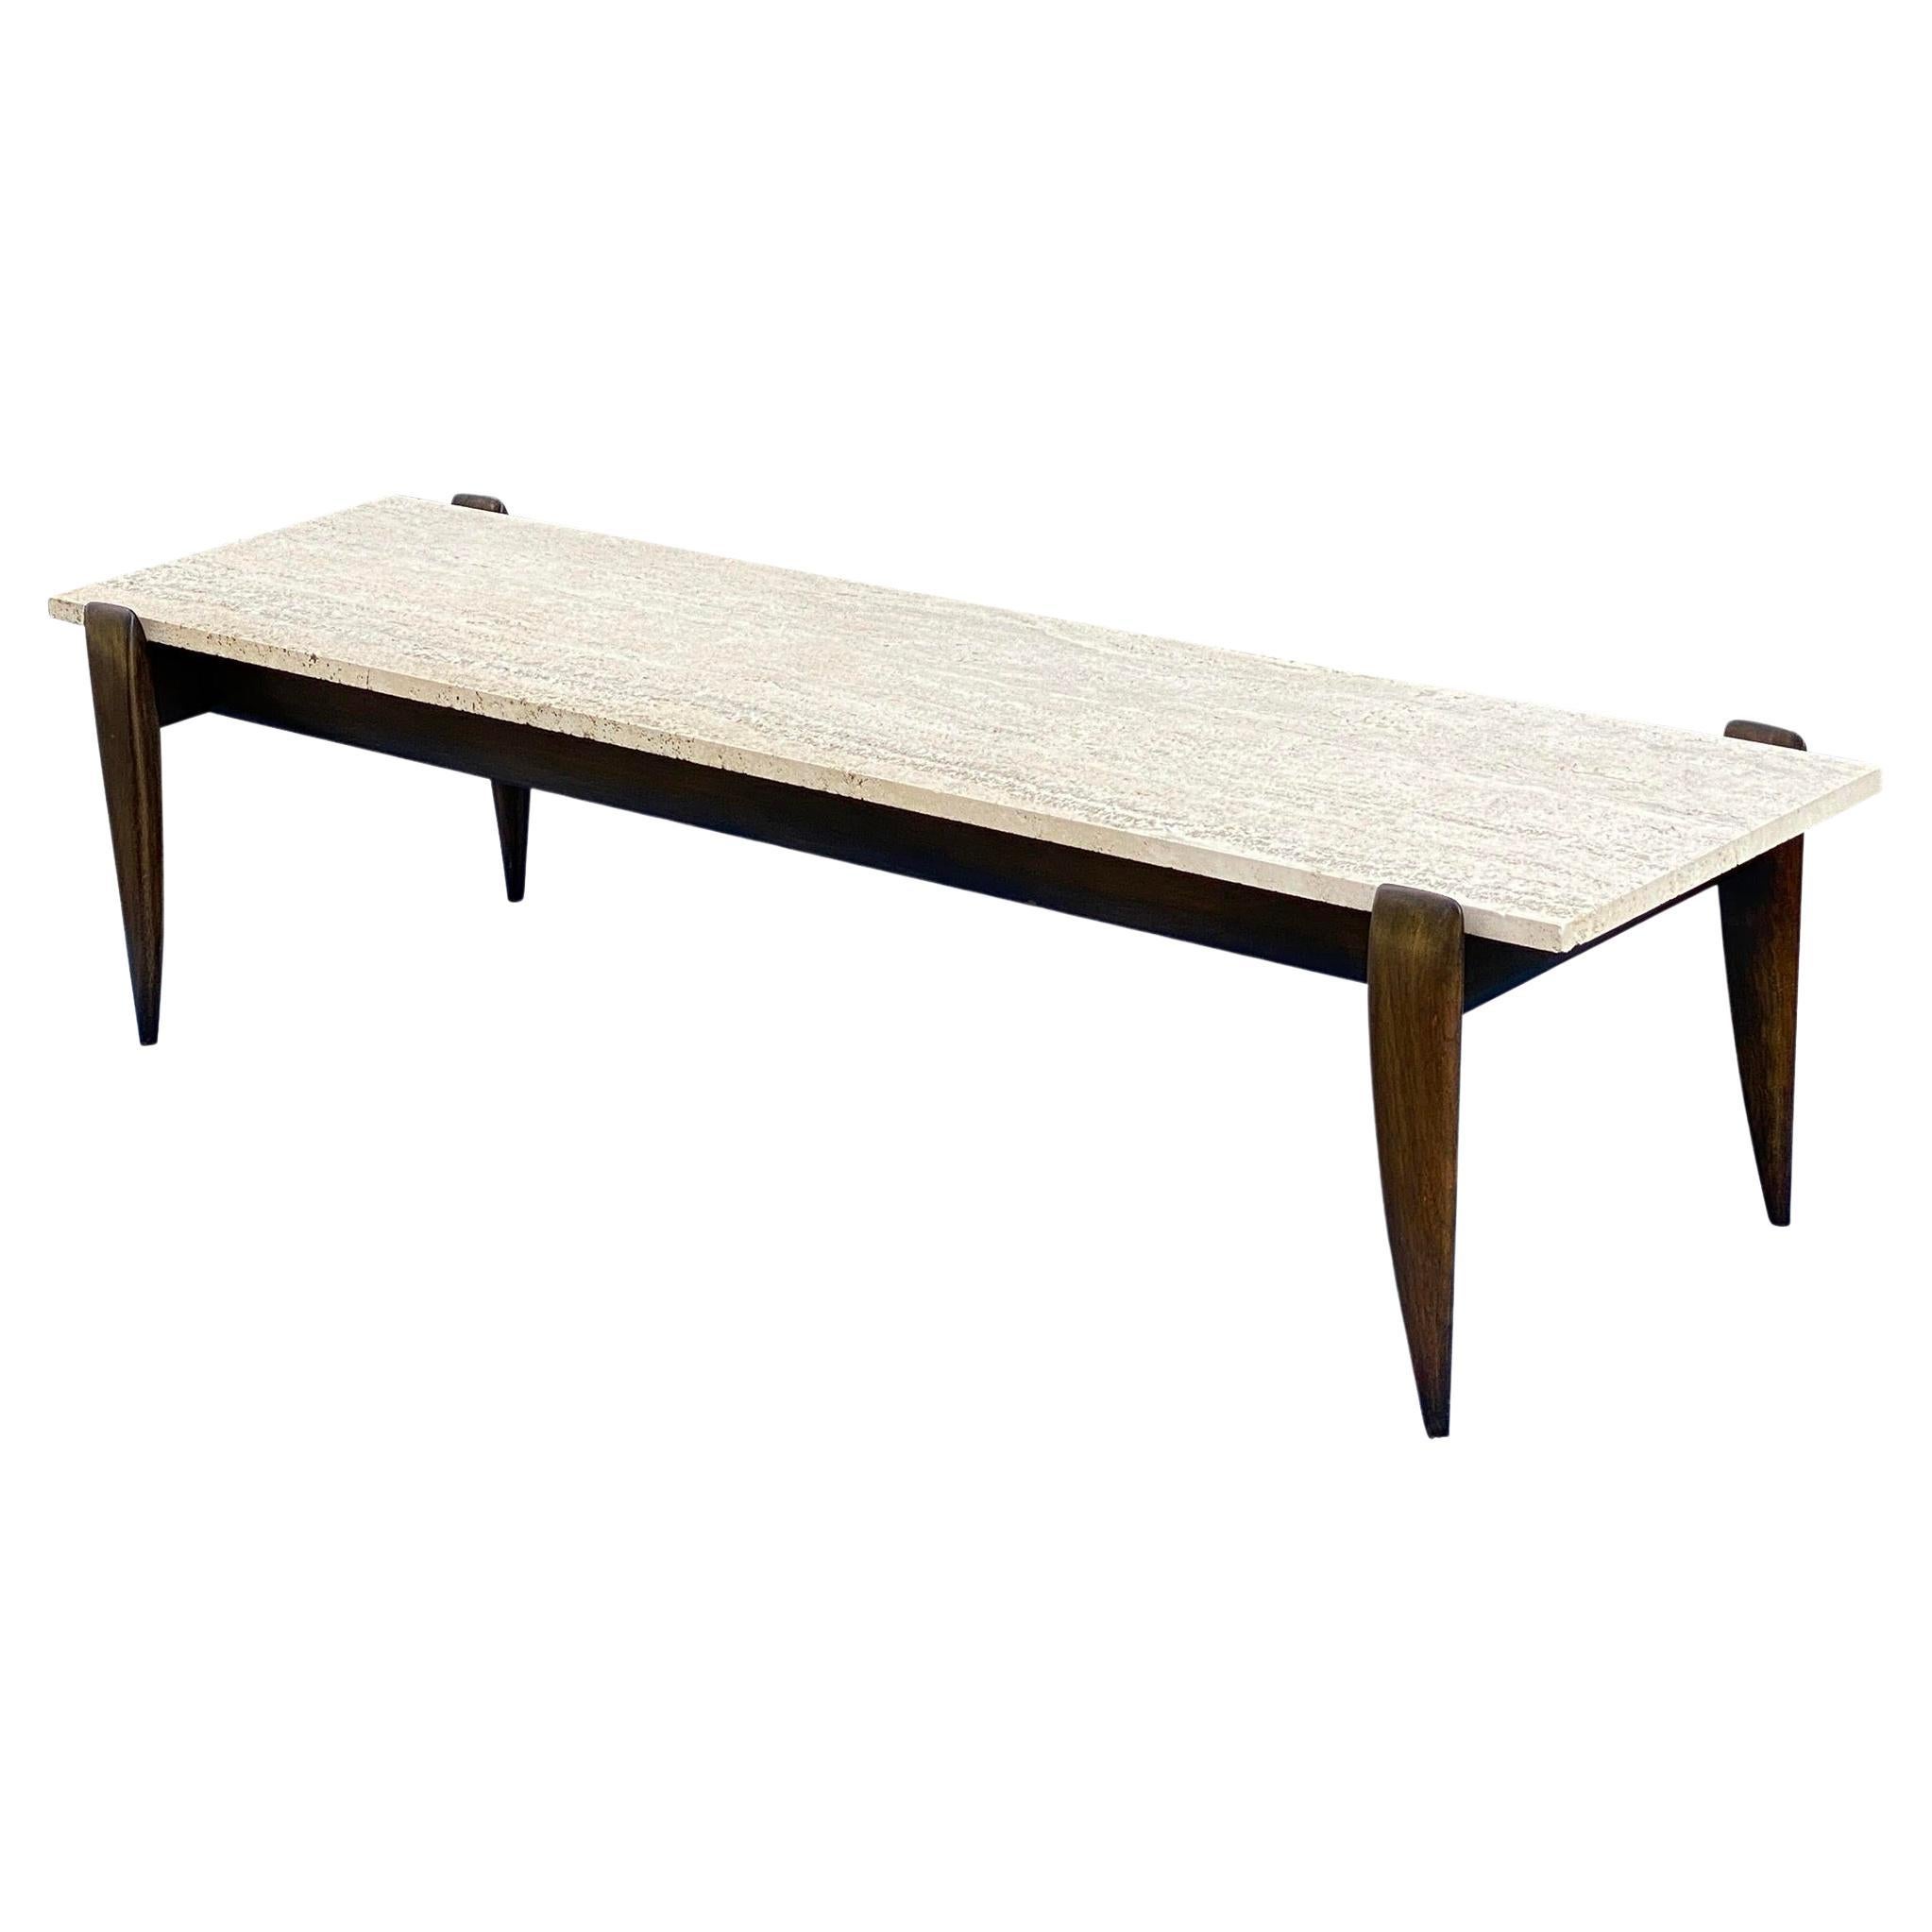 Gio Ponti for M. Singer & Sons Walnut Coffee Table with Travertine Top